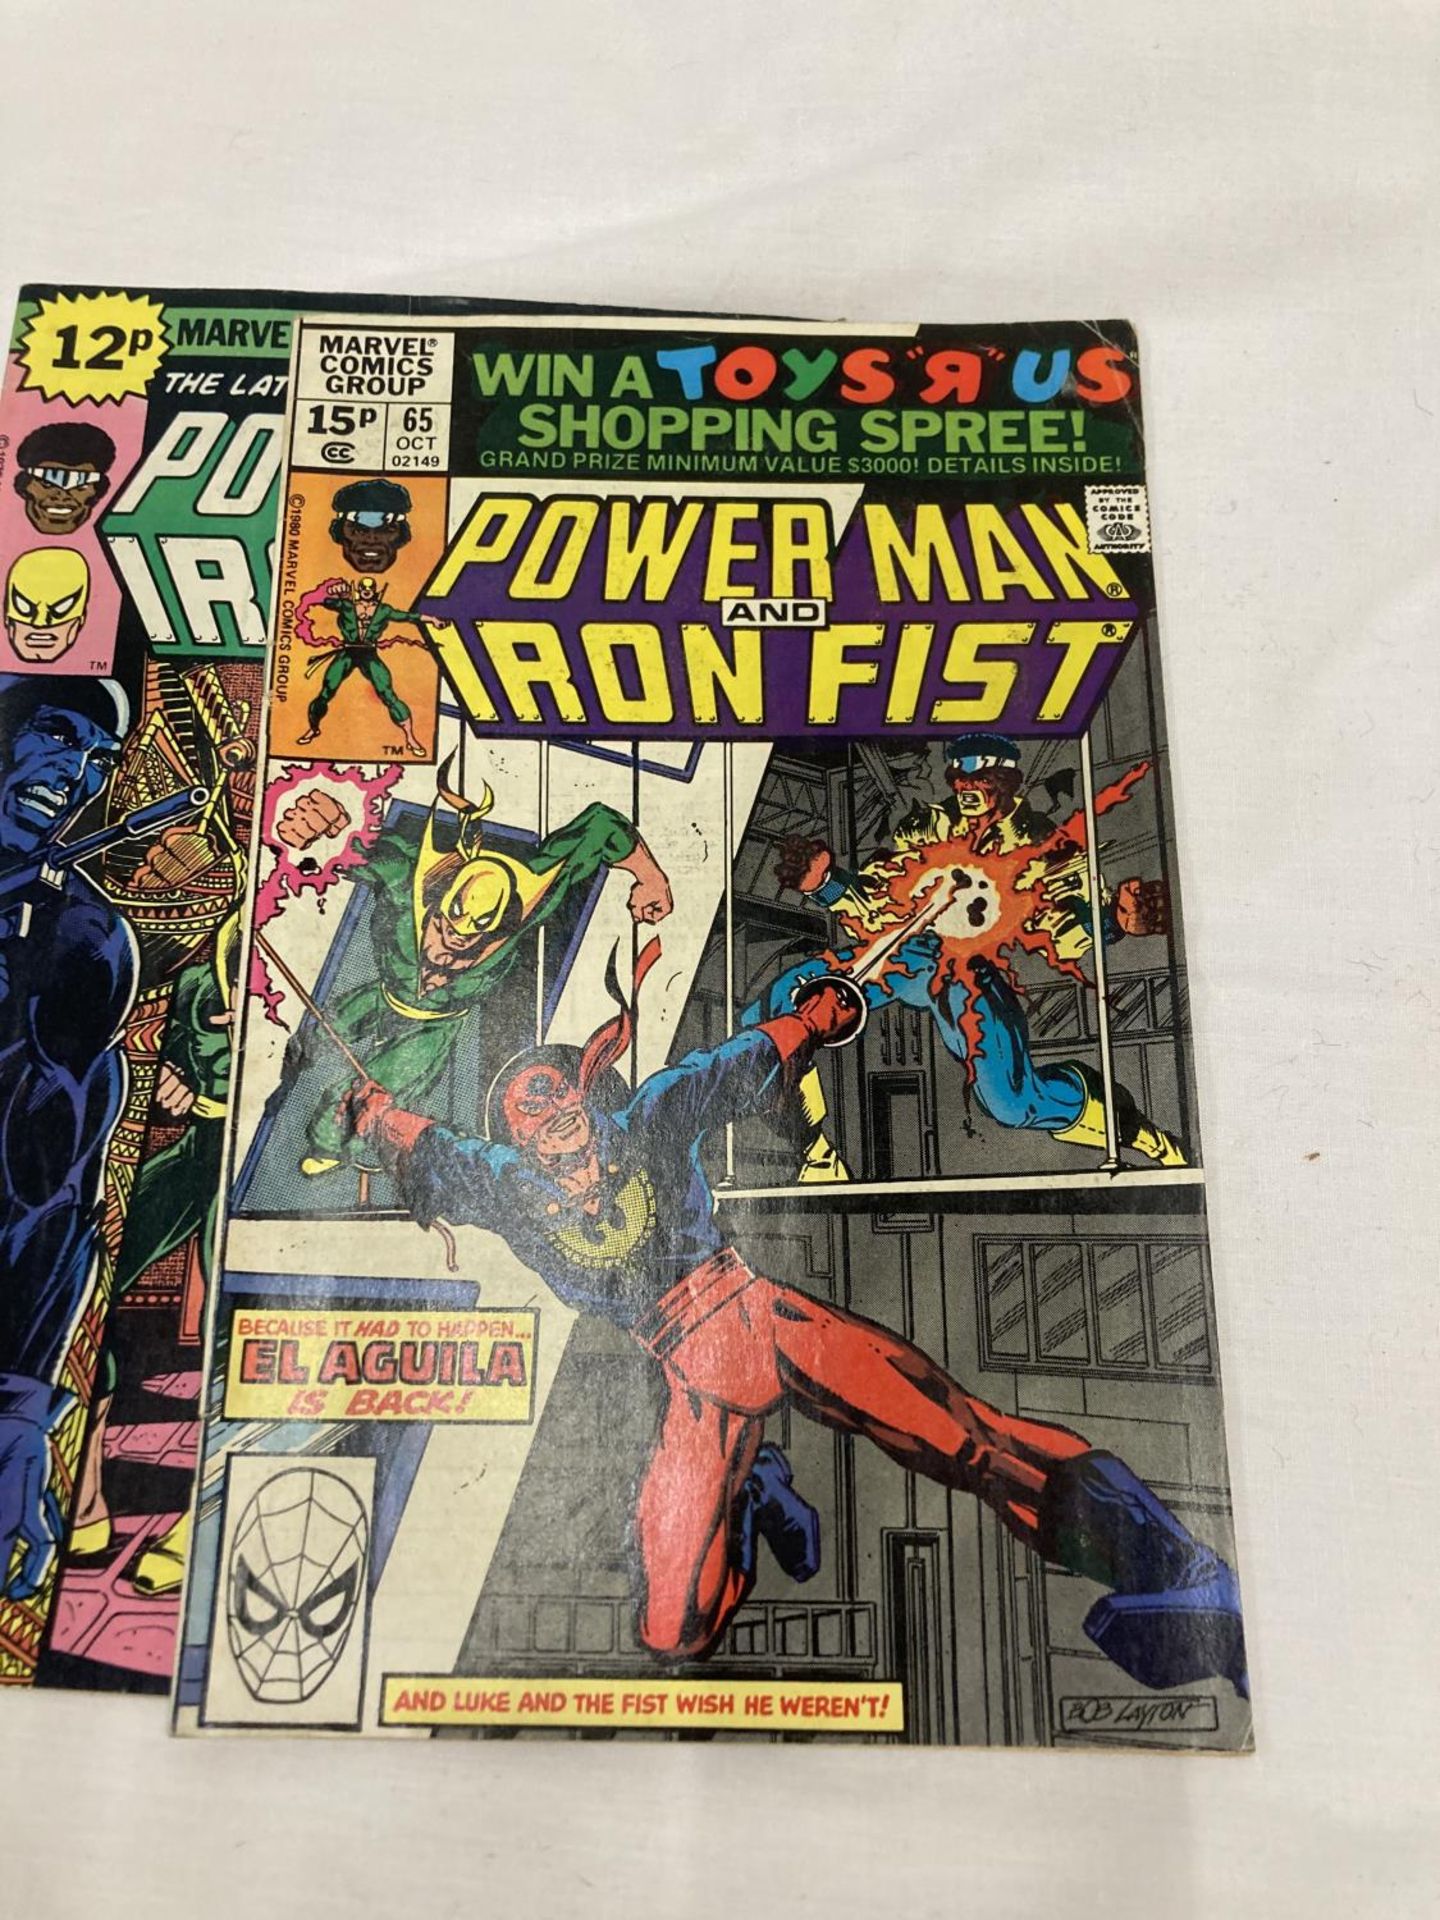 FIVE VINTAGE MARVEL POWERMAN AND IRON FISH COMICS FROM THE 1970'S - Image 9 of 14